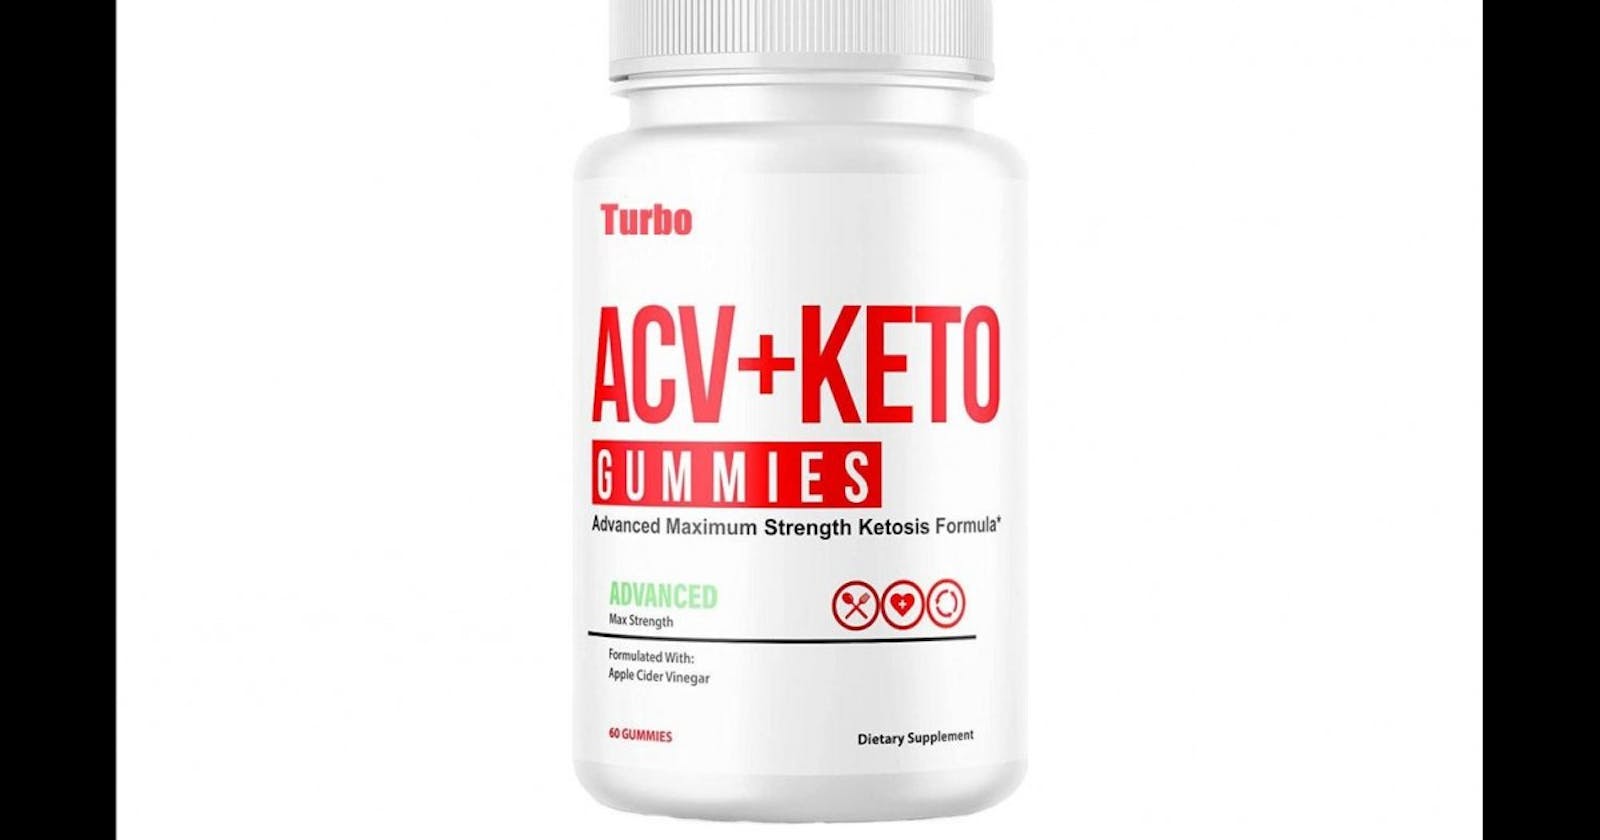 Turbo Keto Gummies: Are They Safe For Lose Weight?